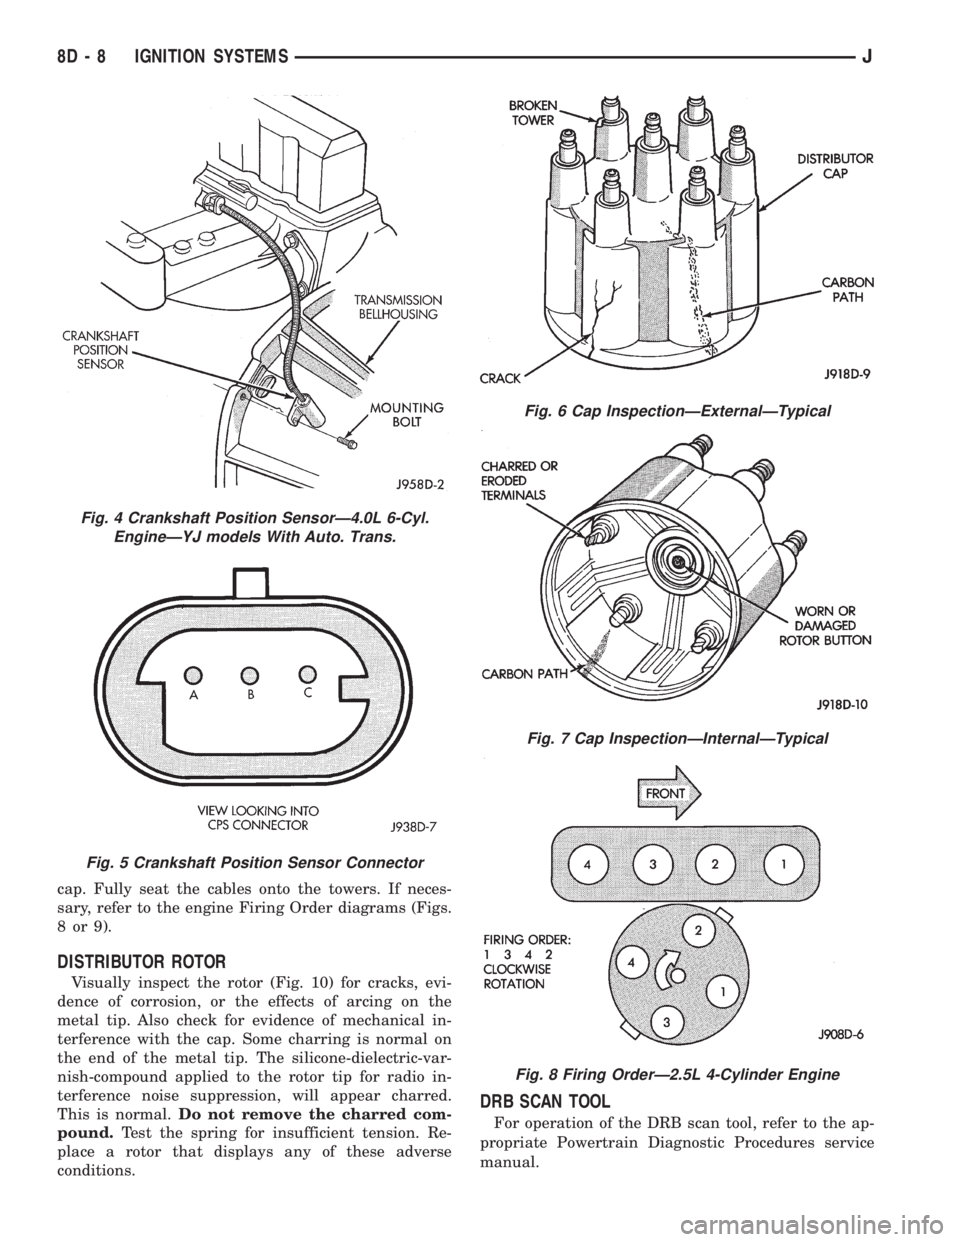 JEEP XJ 1995  Service And Repair Manual cap. Fully seat the cables onto the towers. If neces-
sary, refer to the engine Firing Order diagrams (Figs.
8or9).
DISTRIBUTOR ROTOR
Visually inspect the rotor (Fig. 10) for cracks, evi-
dence of cor